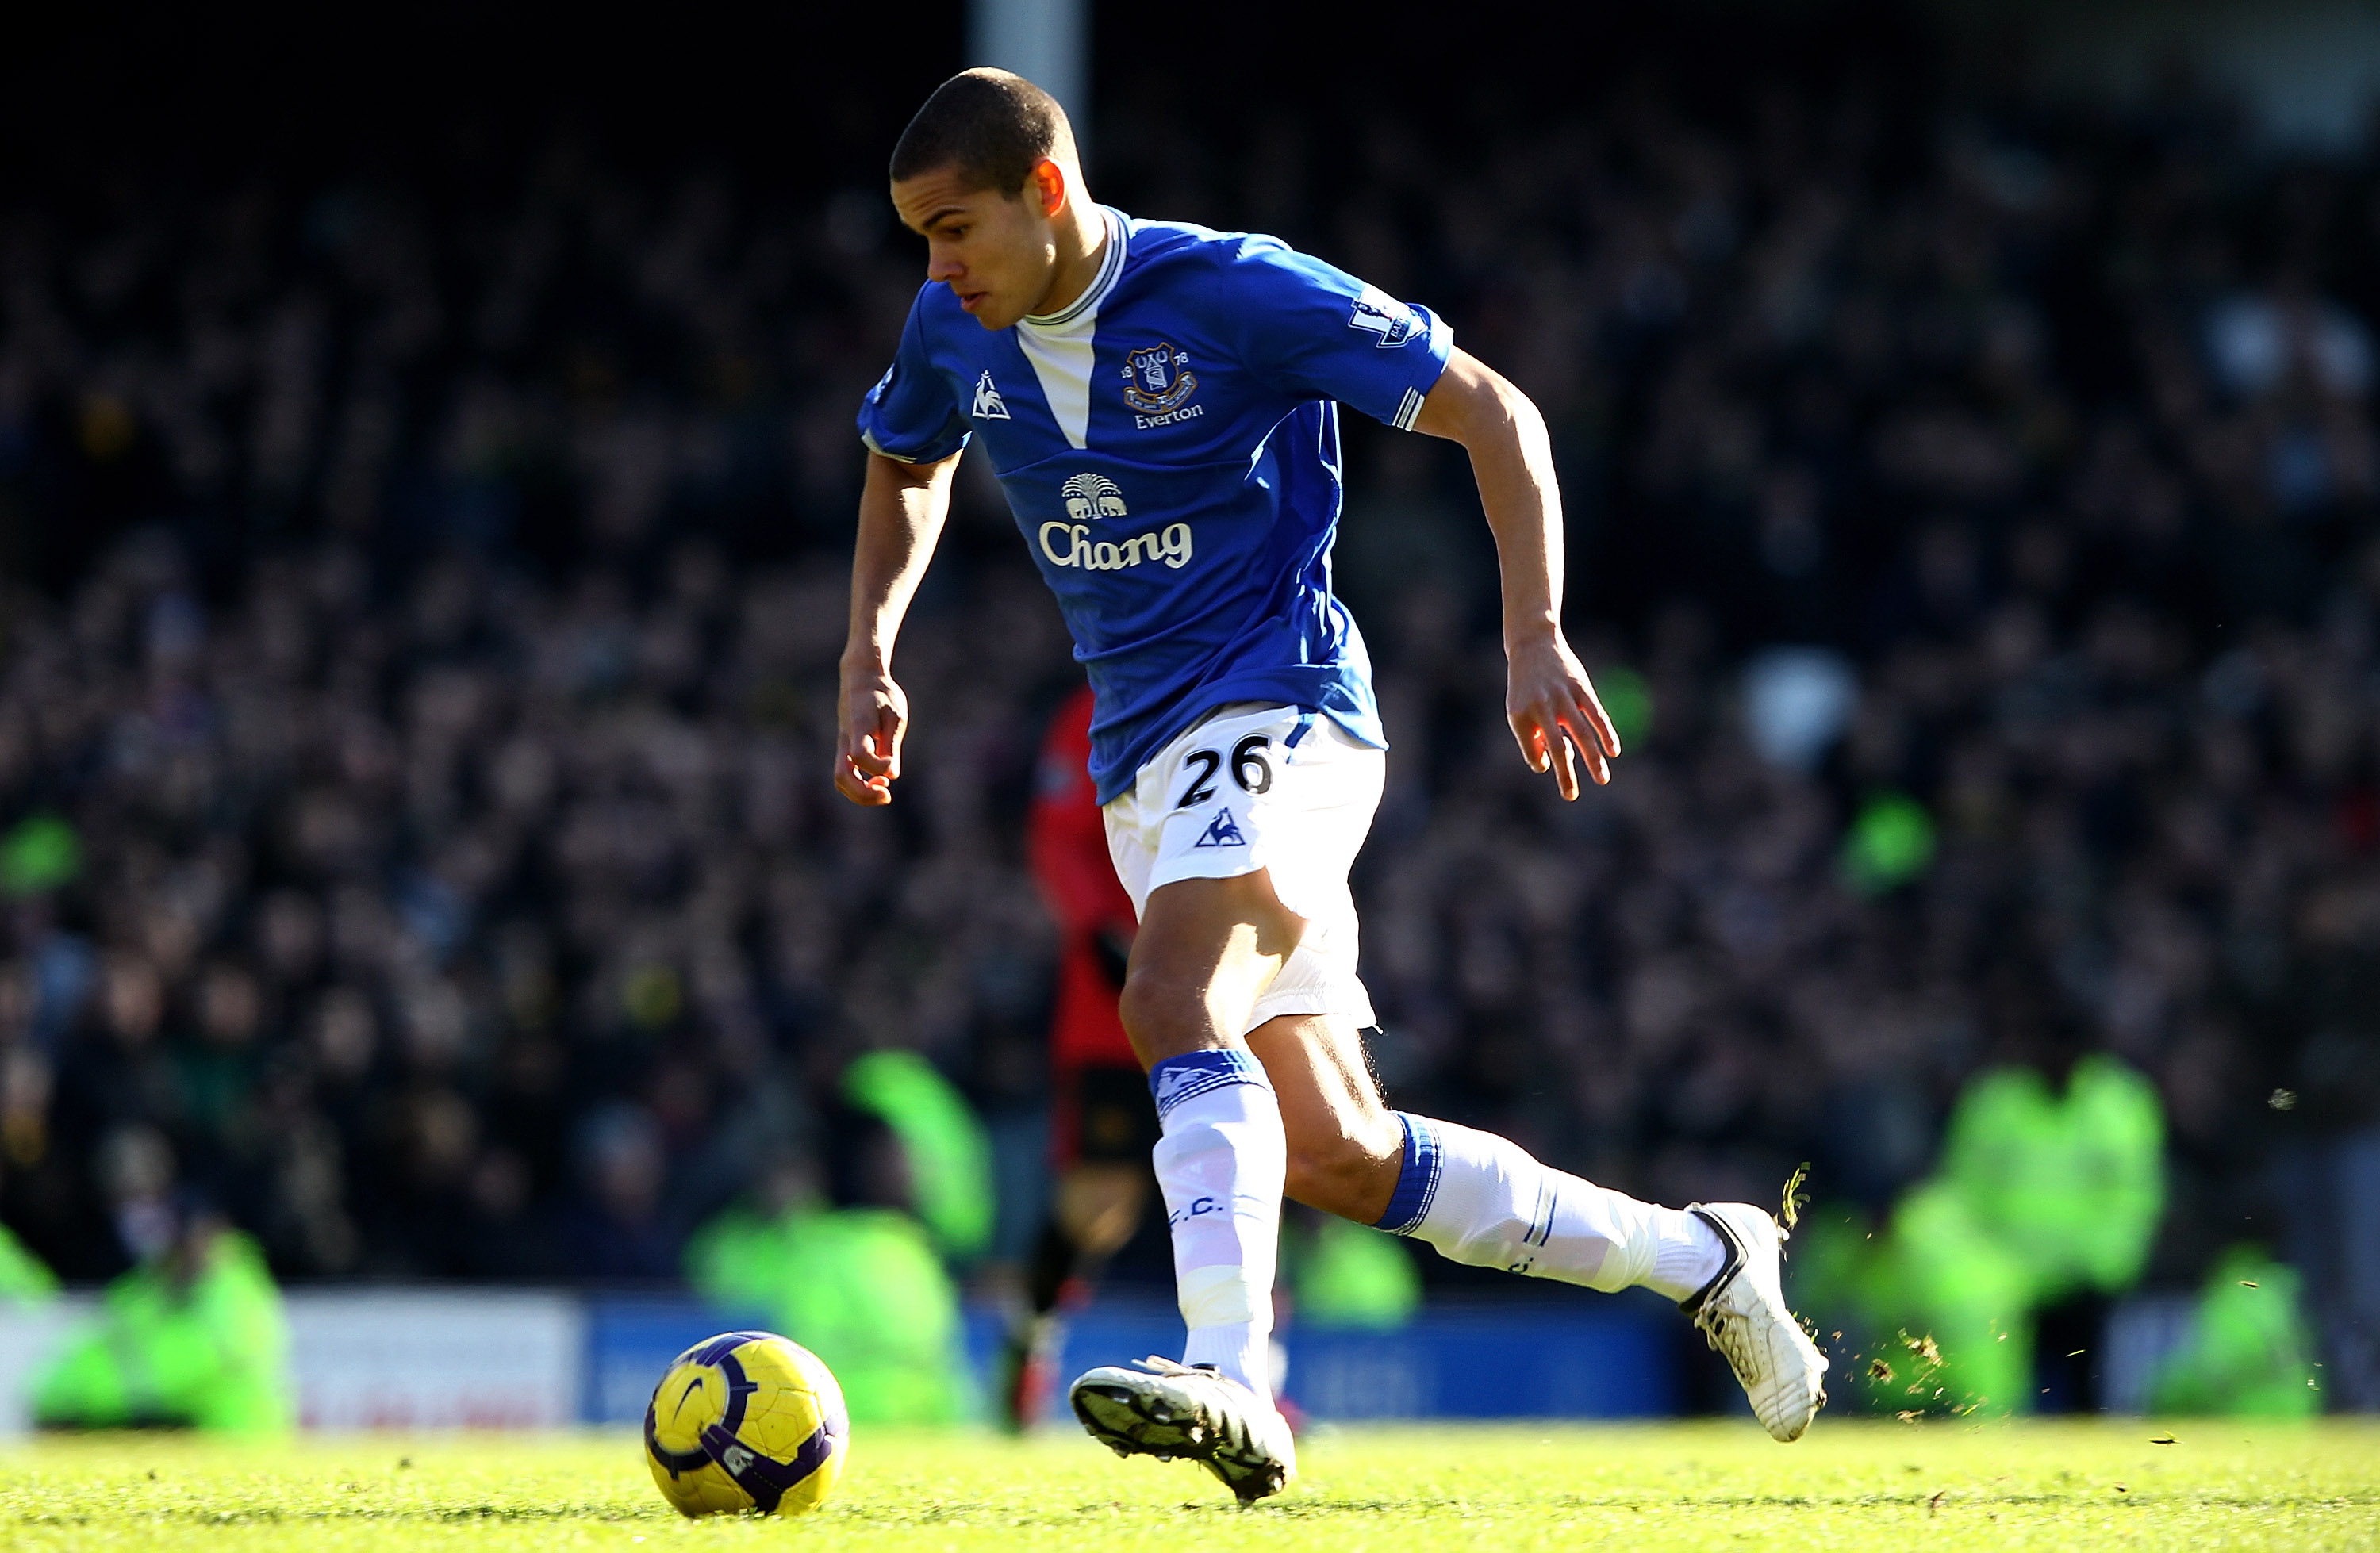 LIVERPOOL, ENGLAND - FEBRUARY 20:  Jack Rodwell of Everton runs in to score his team's third goal during the Barclays Premier League match between Everton and Manchester United at Goodison Park on February 20, 2010 in Liverpool, England.  (Photo by Clive